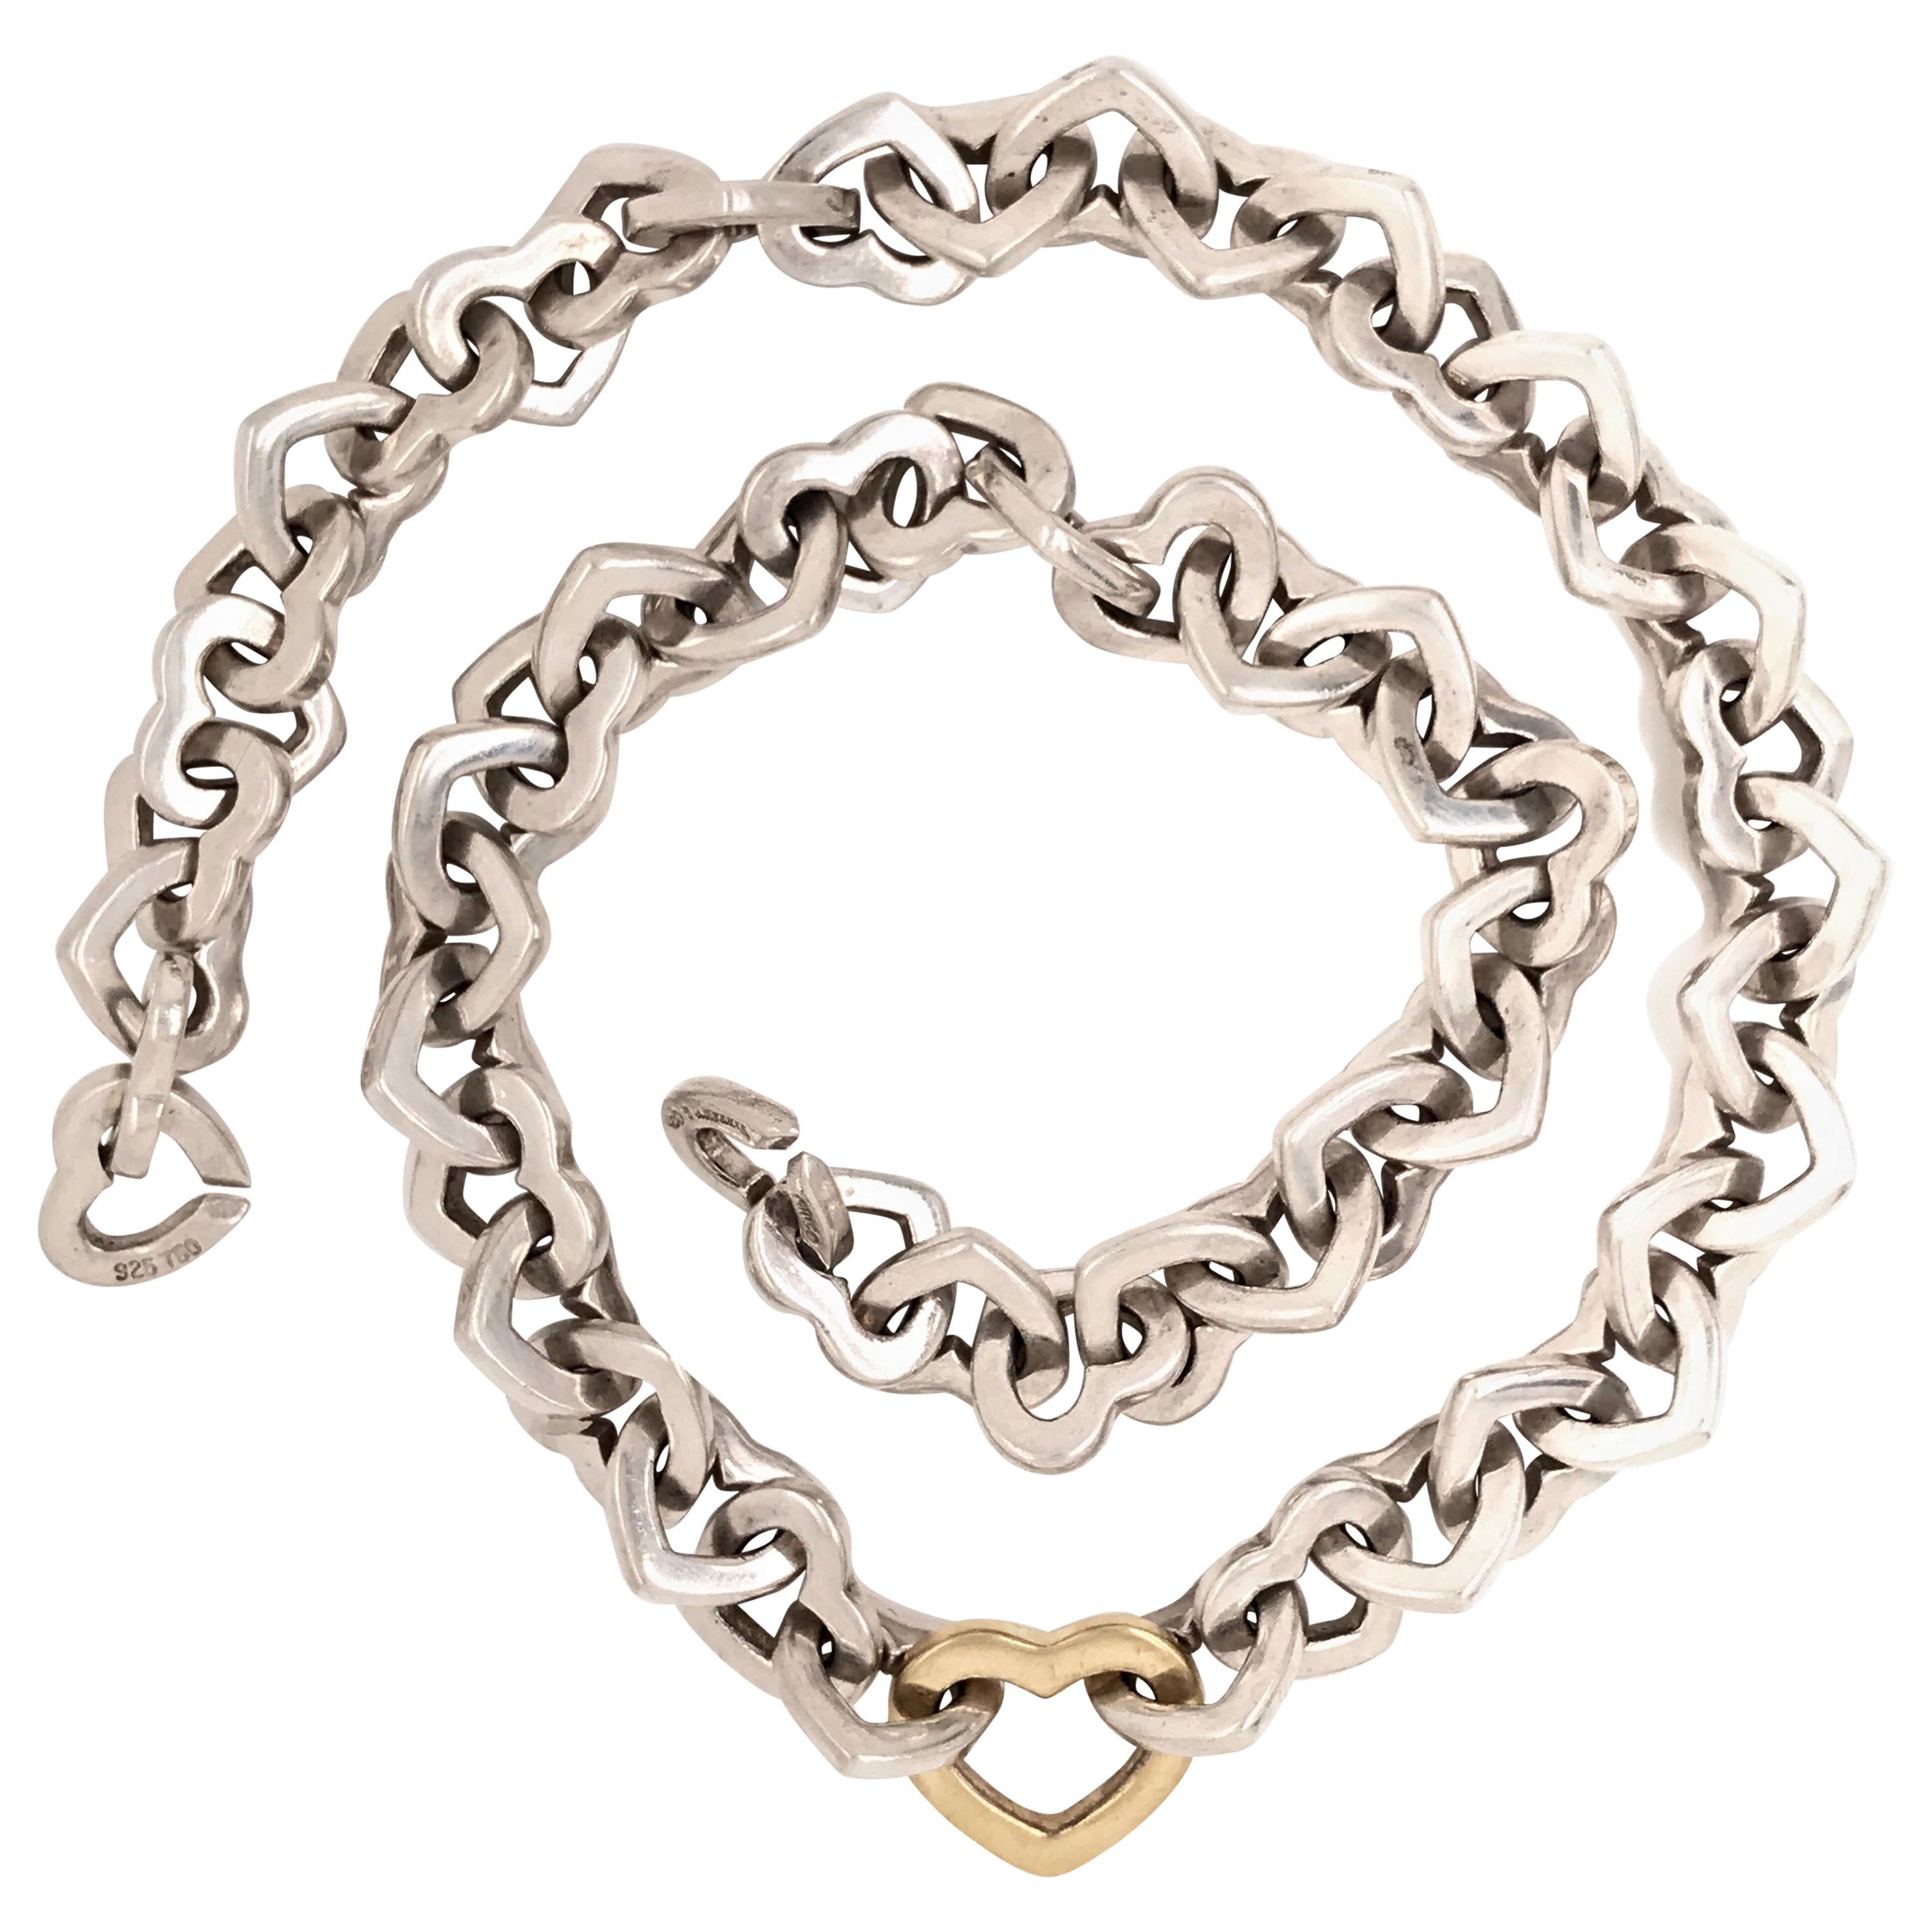 Tiffany & Co. Heart Link Sterling Silver and 18 Karat Gold Necklace, 2000